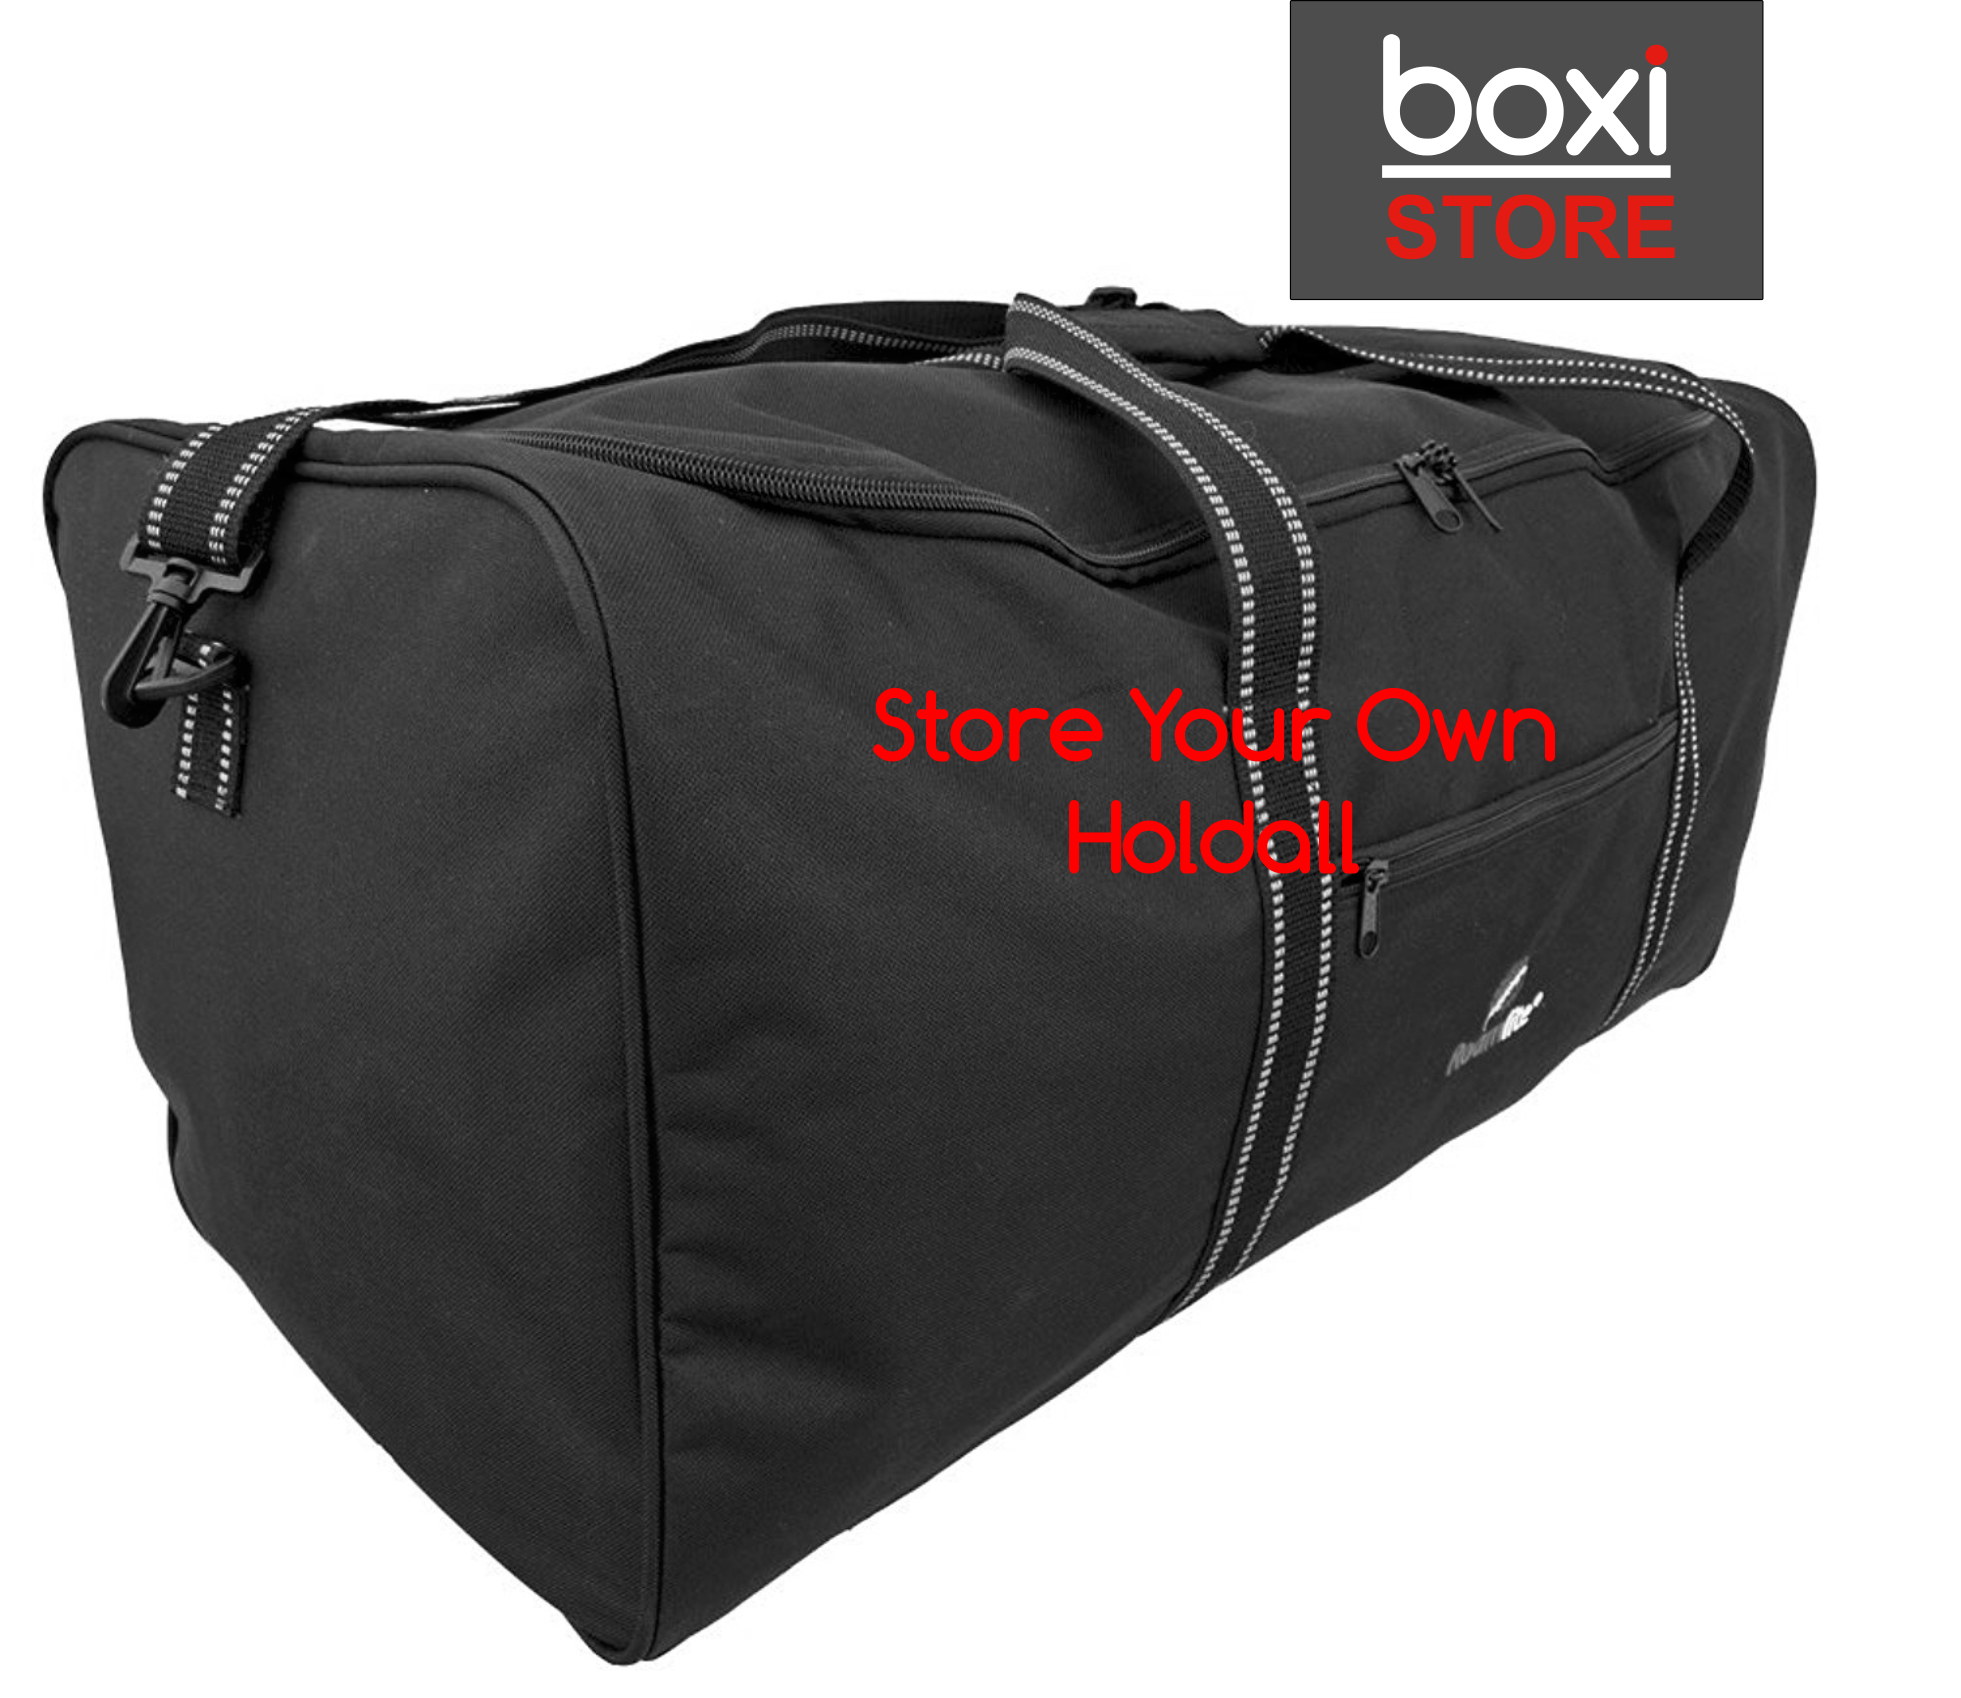 BoxiStore Store Your Own Holdall